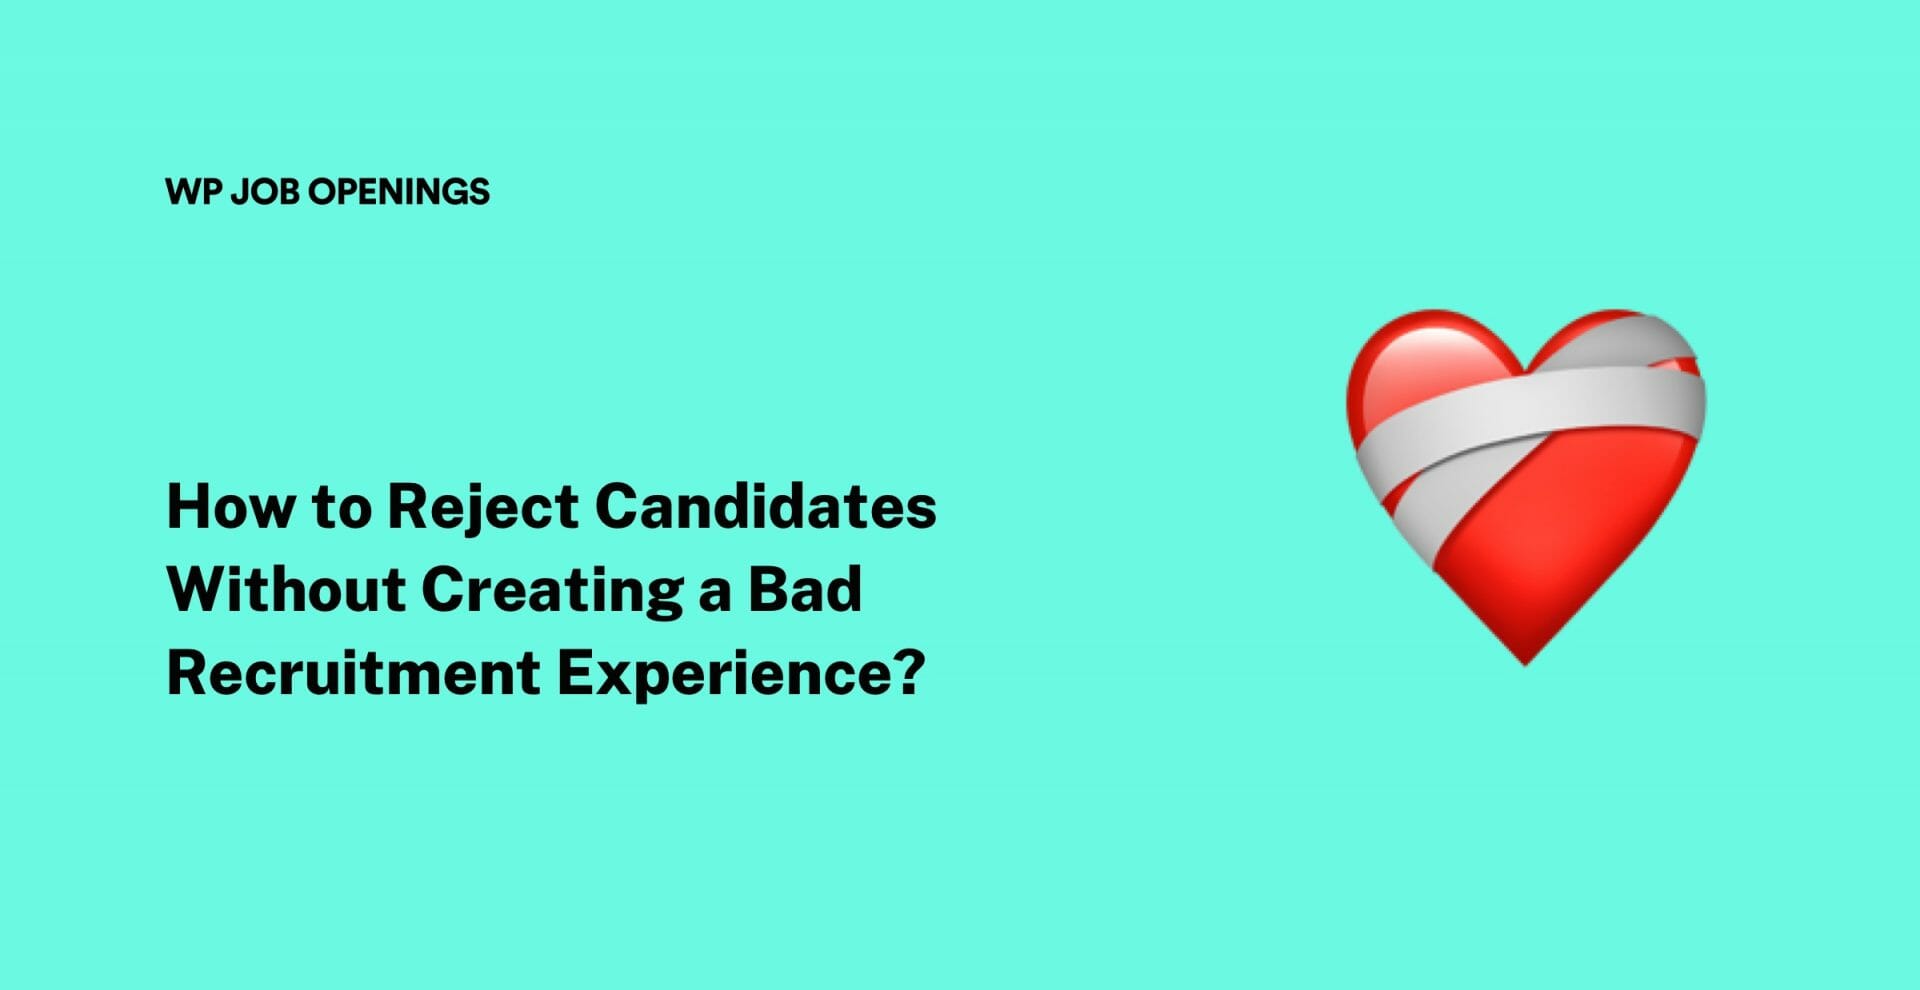 How to Reject Candidates Without Creating a Bad Recruitment Experience?